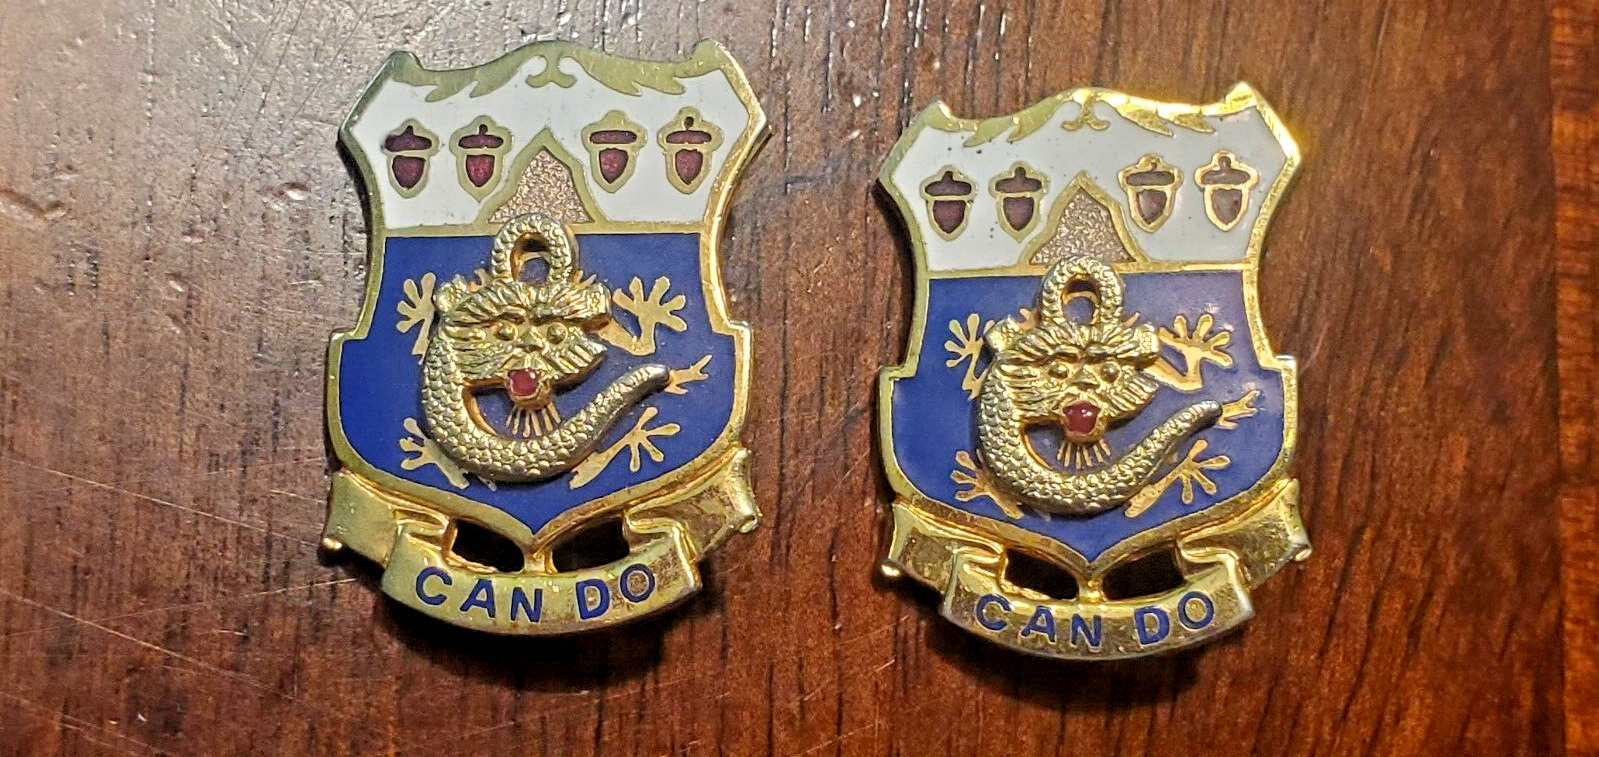 Two 15th Infantry Regiment Insignia DI Unit Crest Pins Pinback N.S. Meyer